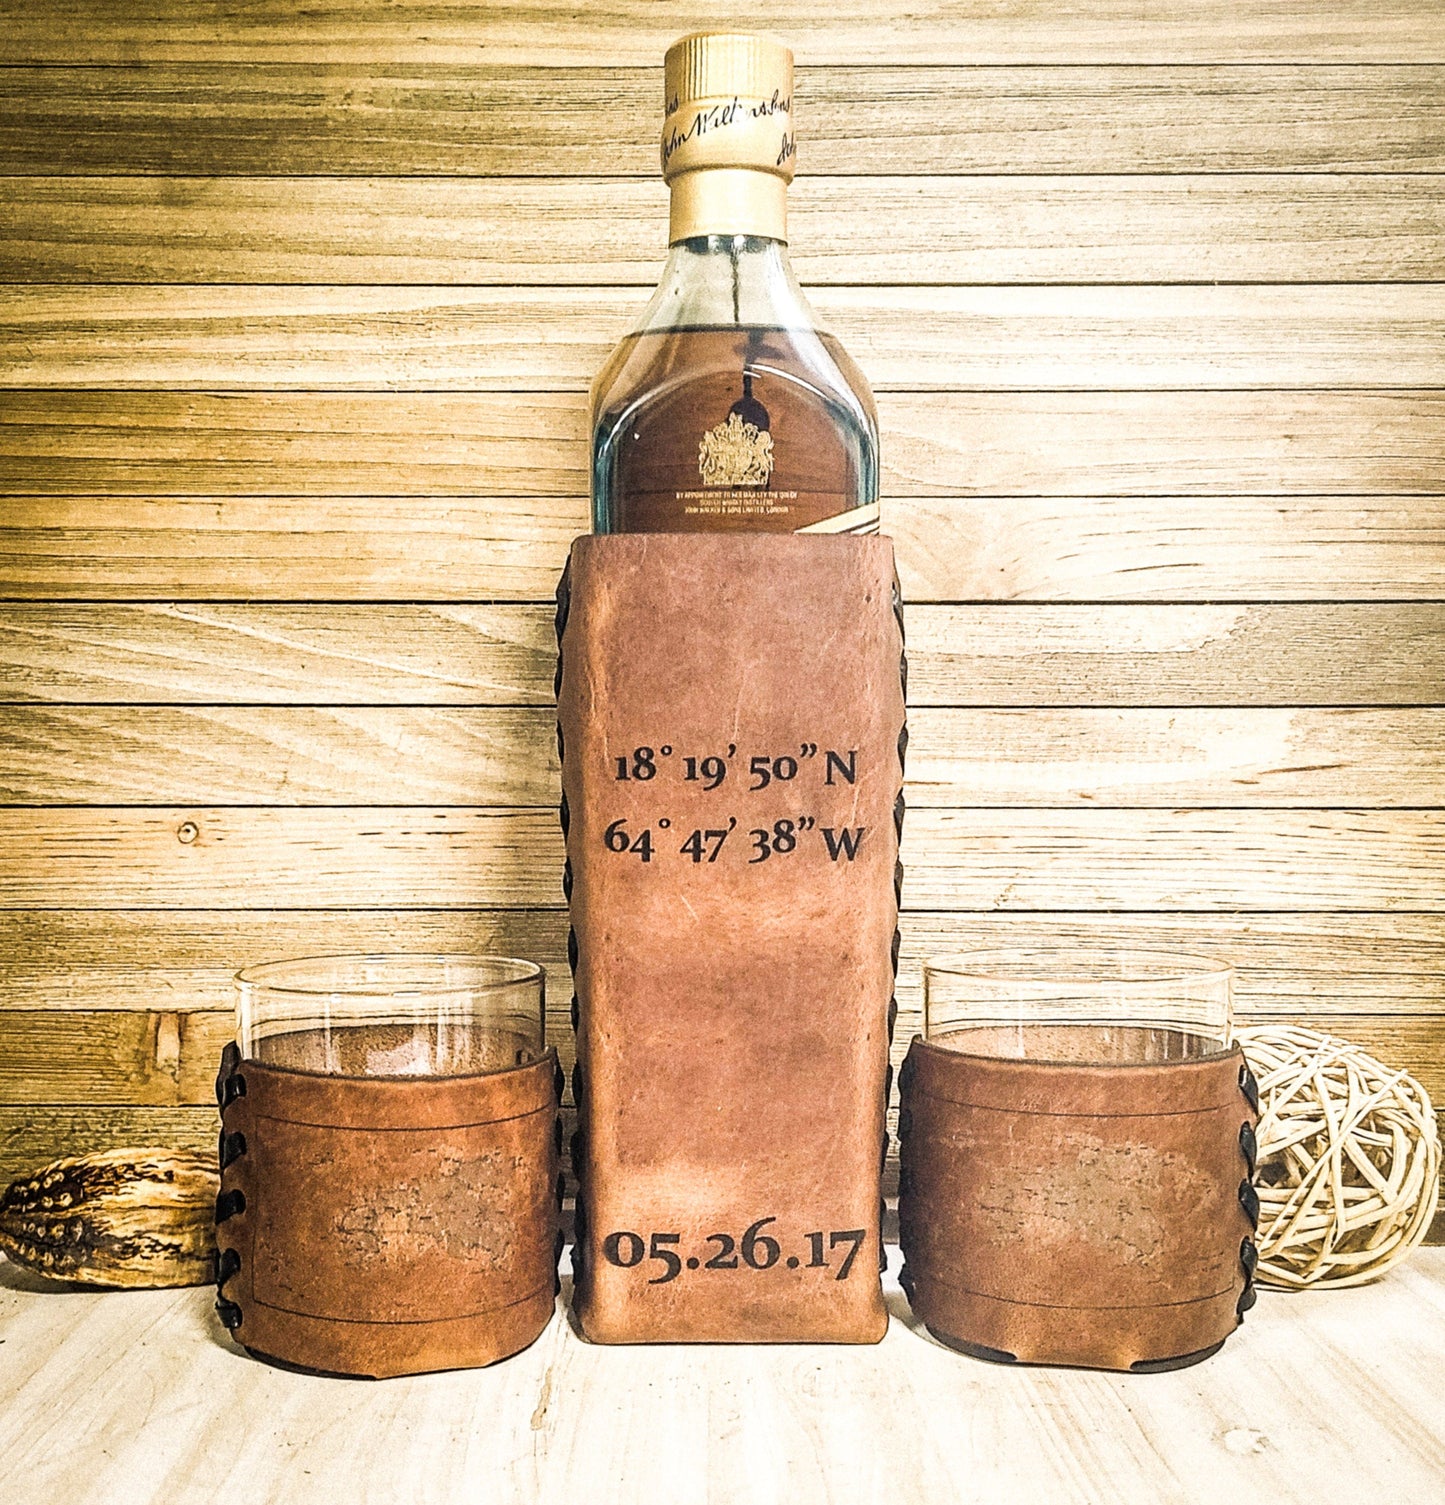 Personalized leather whiskey set with leather wrapped whiskey glasses | Unique Mens birthday gift | Gifts for guys | Personalized Mens gifts